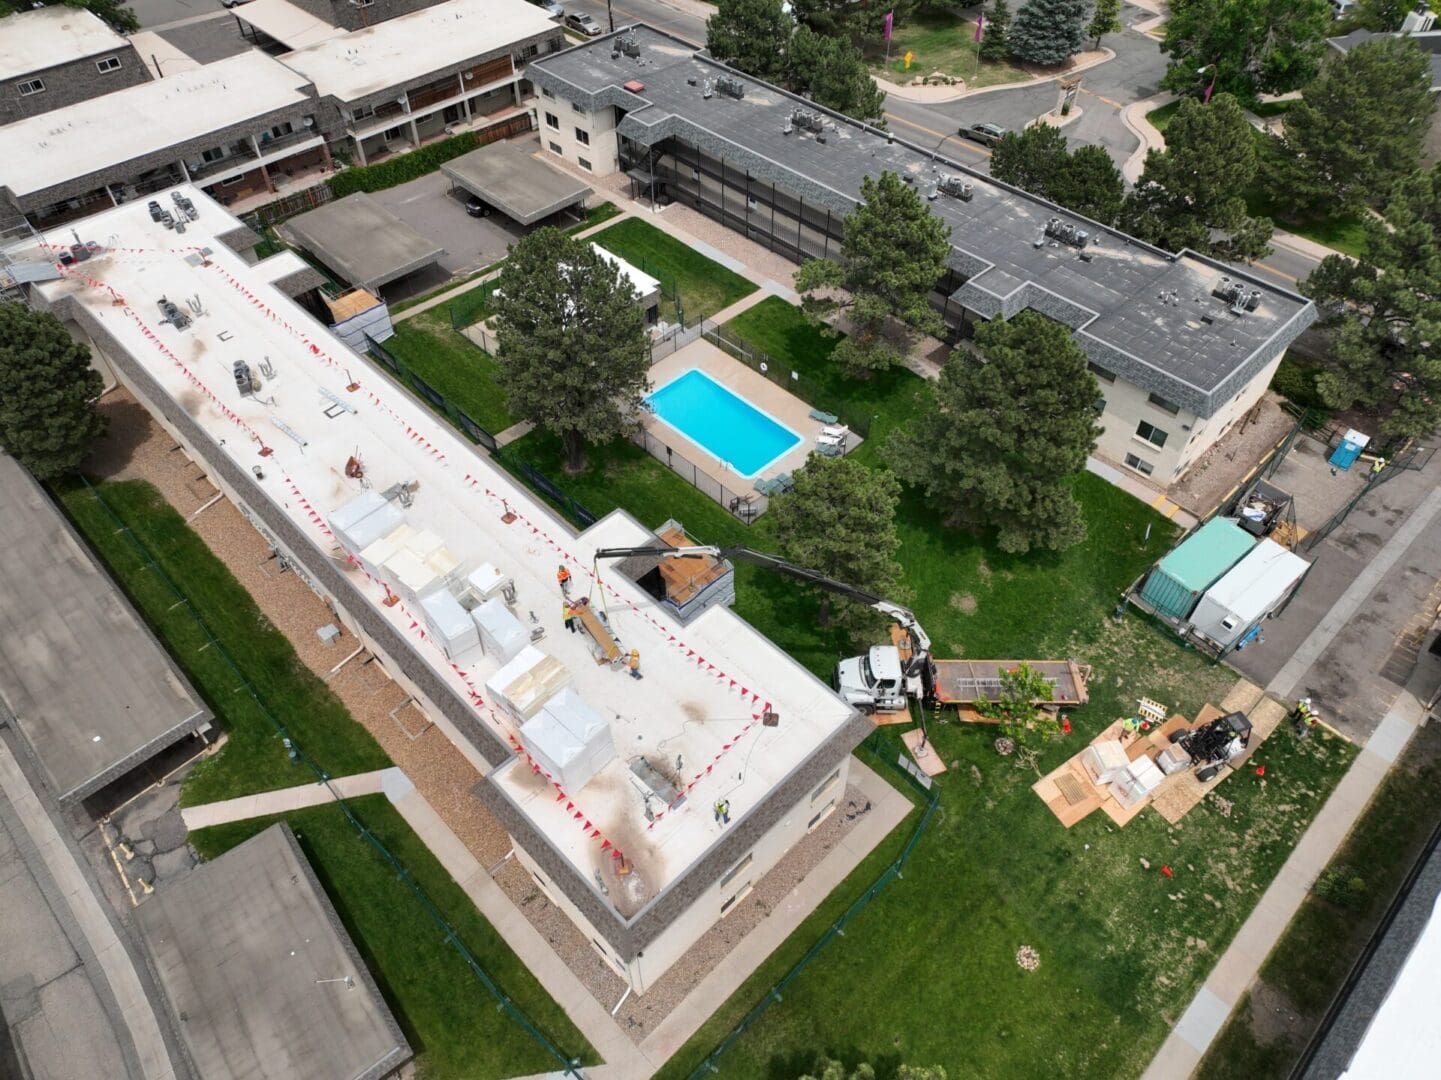 aerial view of building construction with pool